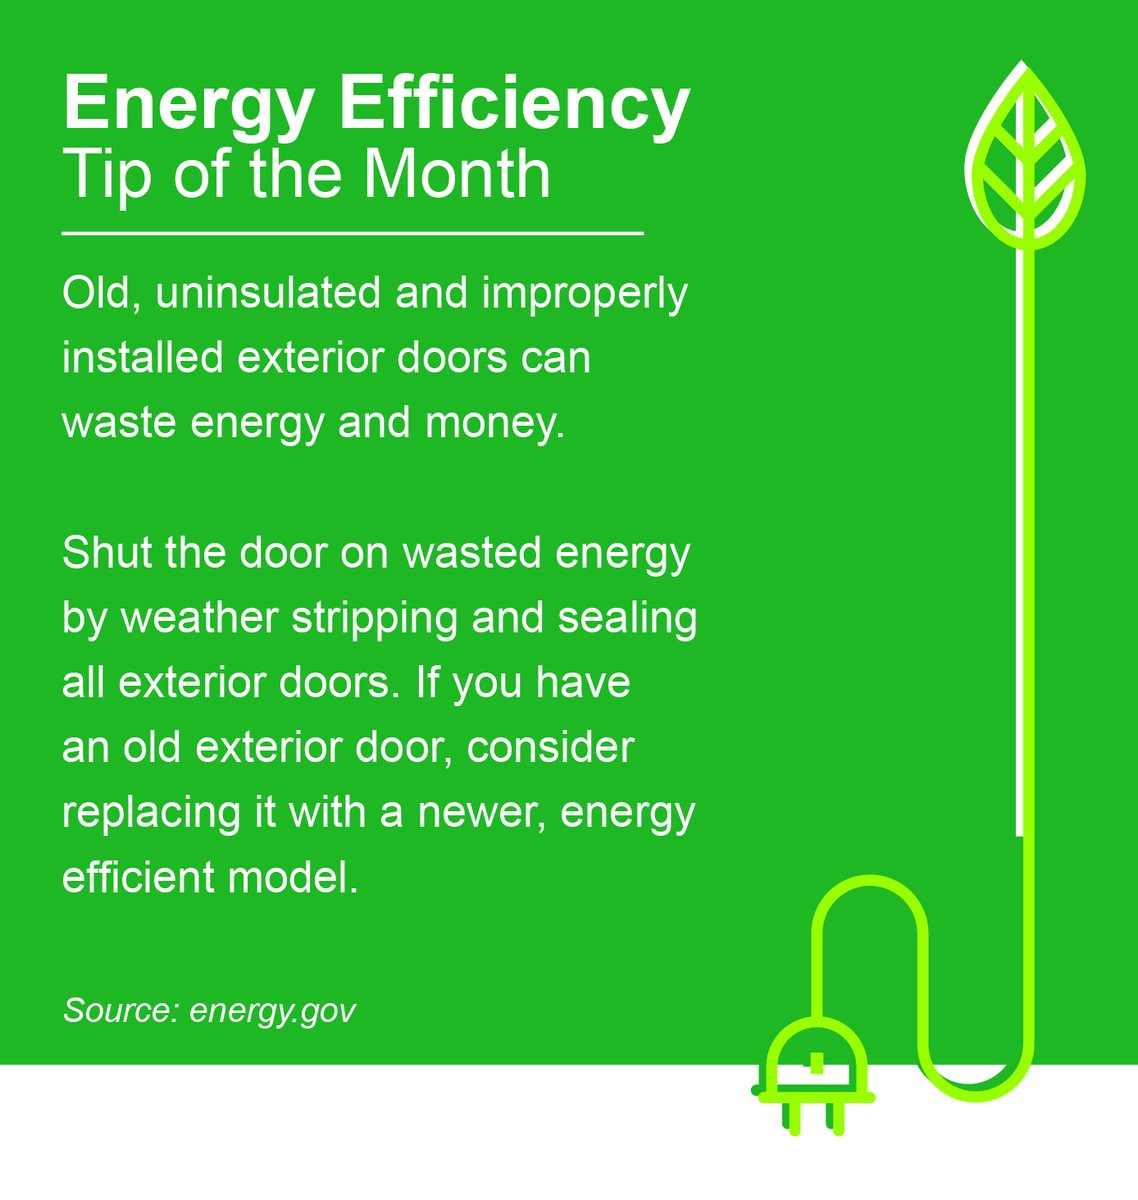 It's starting to get cold out there, Minnesota! Make sure your exterior doors are costing you more on your electricity bill before the real weather hits. https://t.co/VhUdVNHfCh